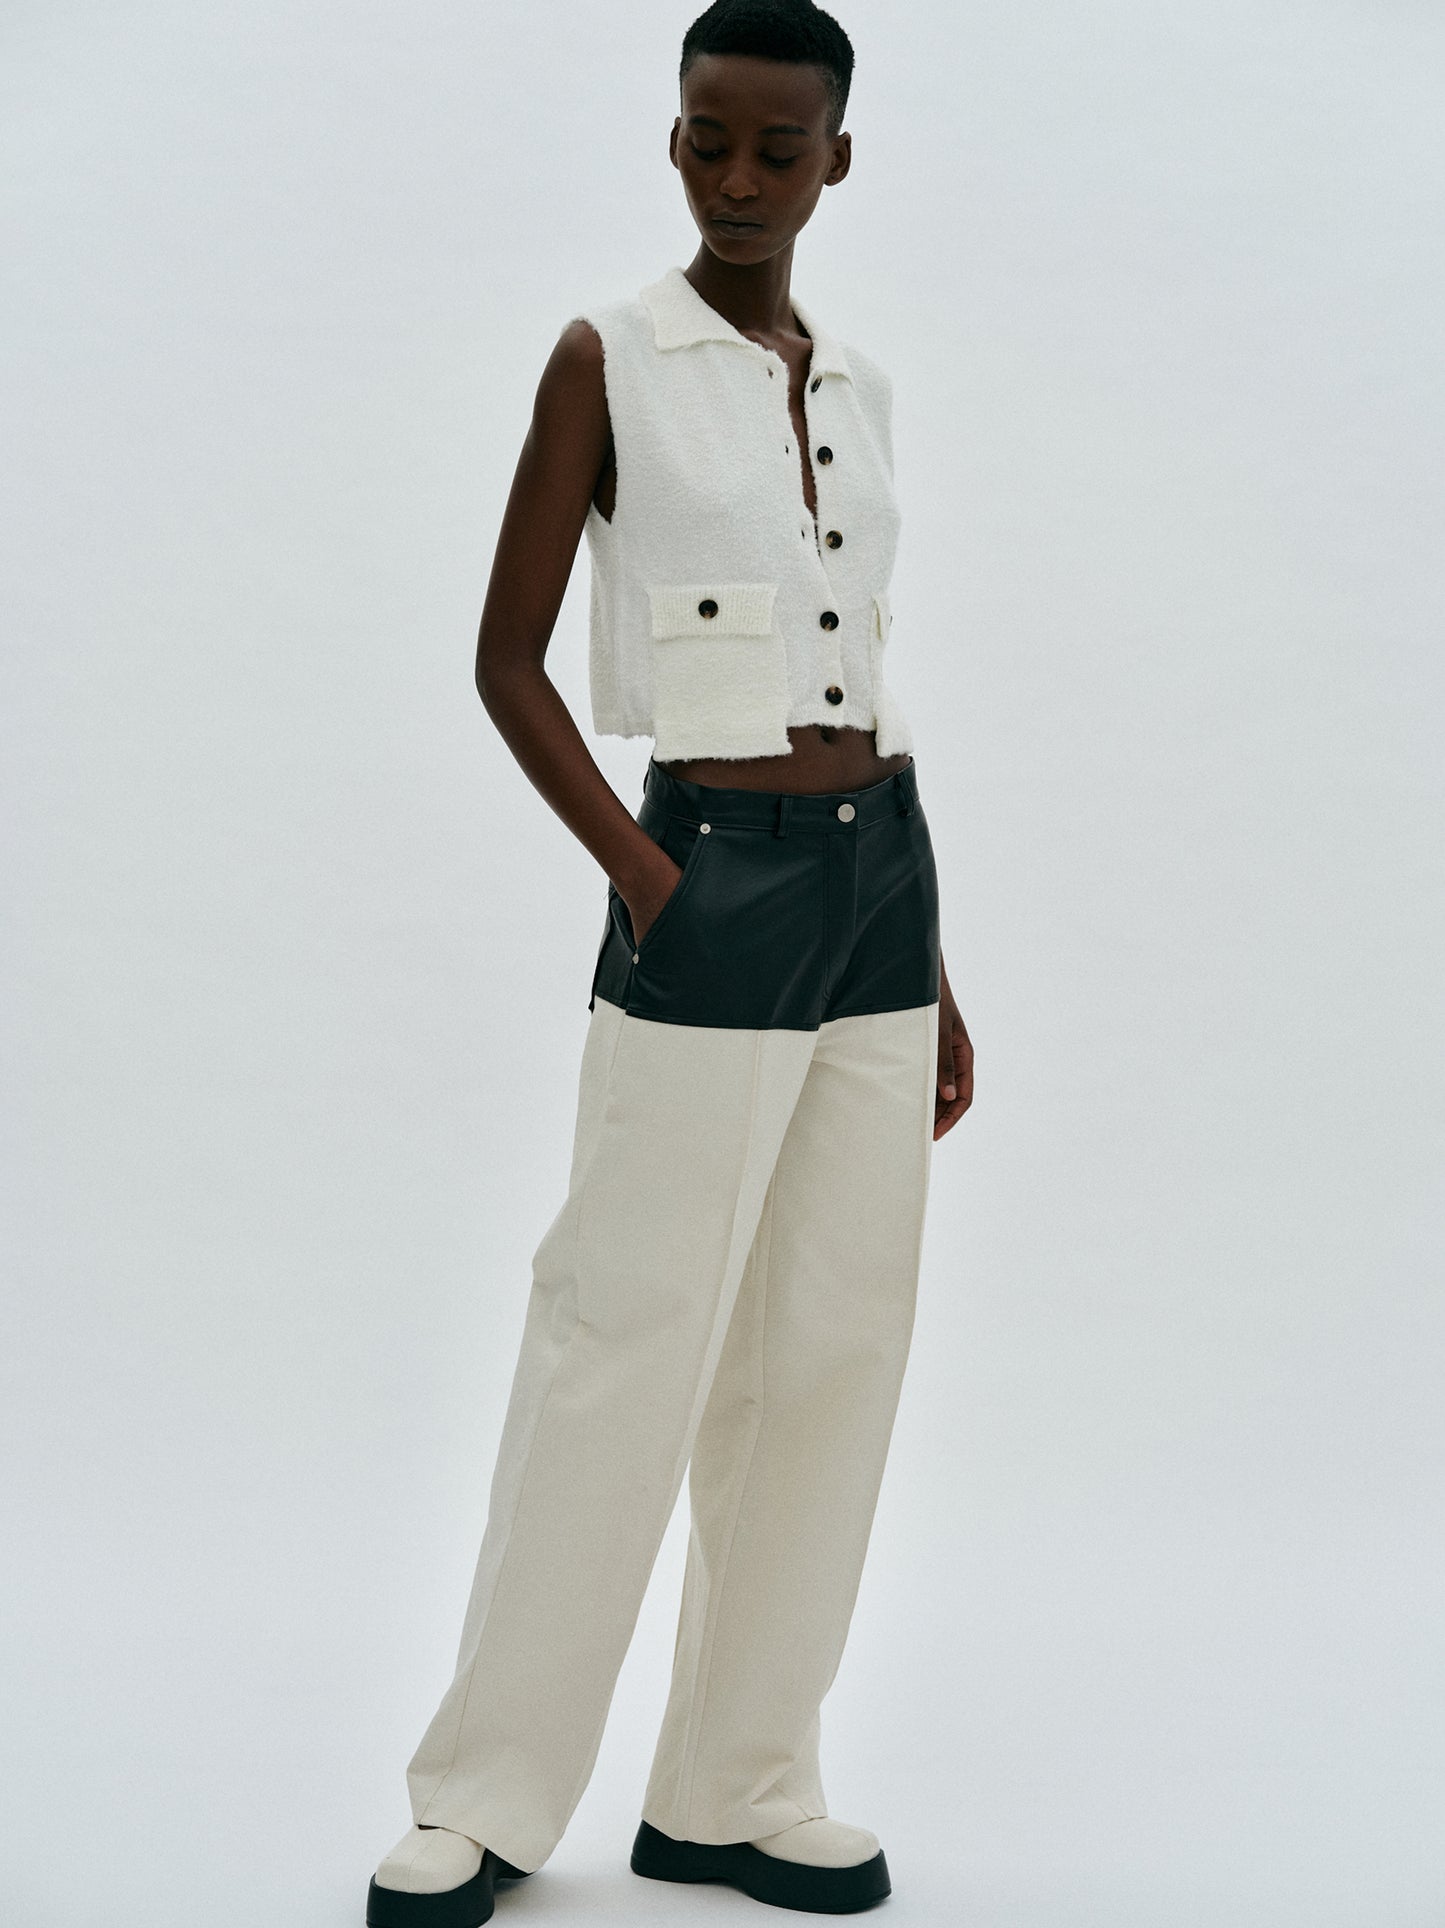 Leather-Paneled Trousers, Ivory